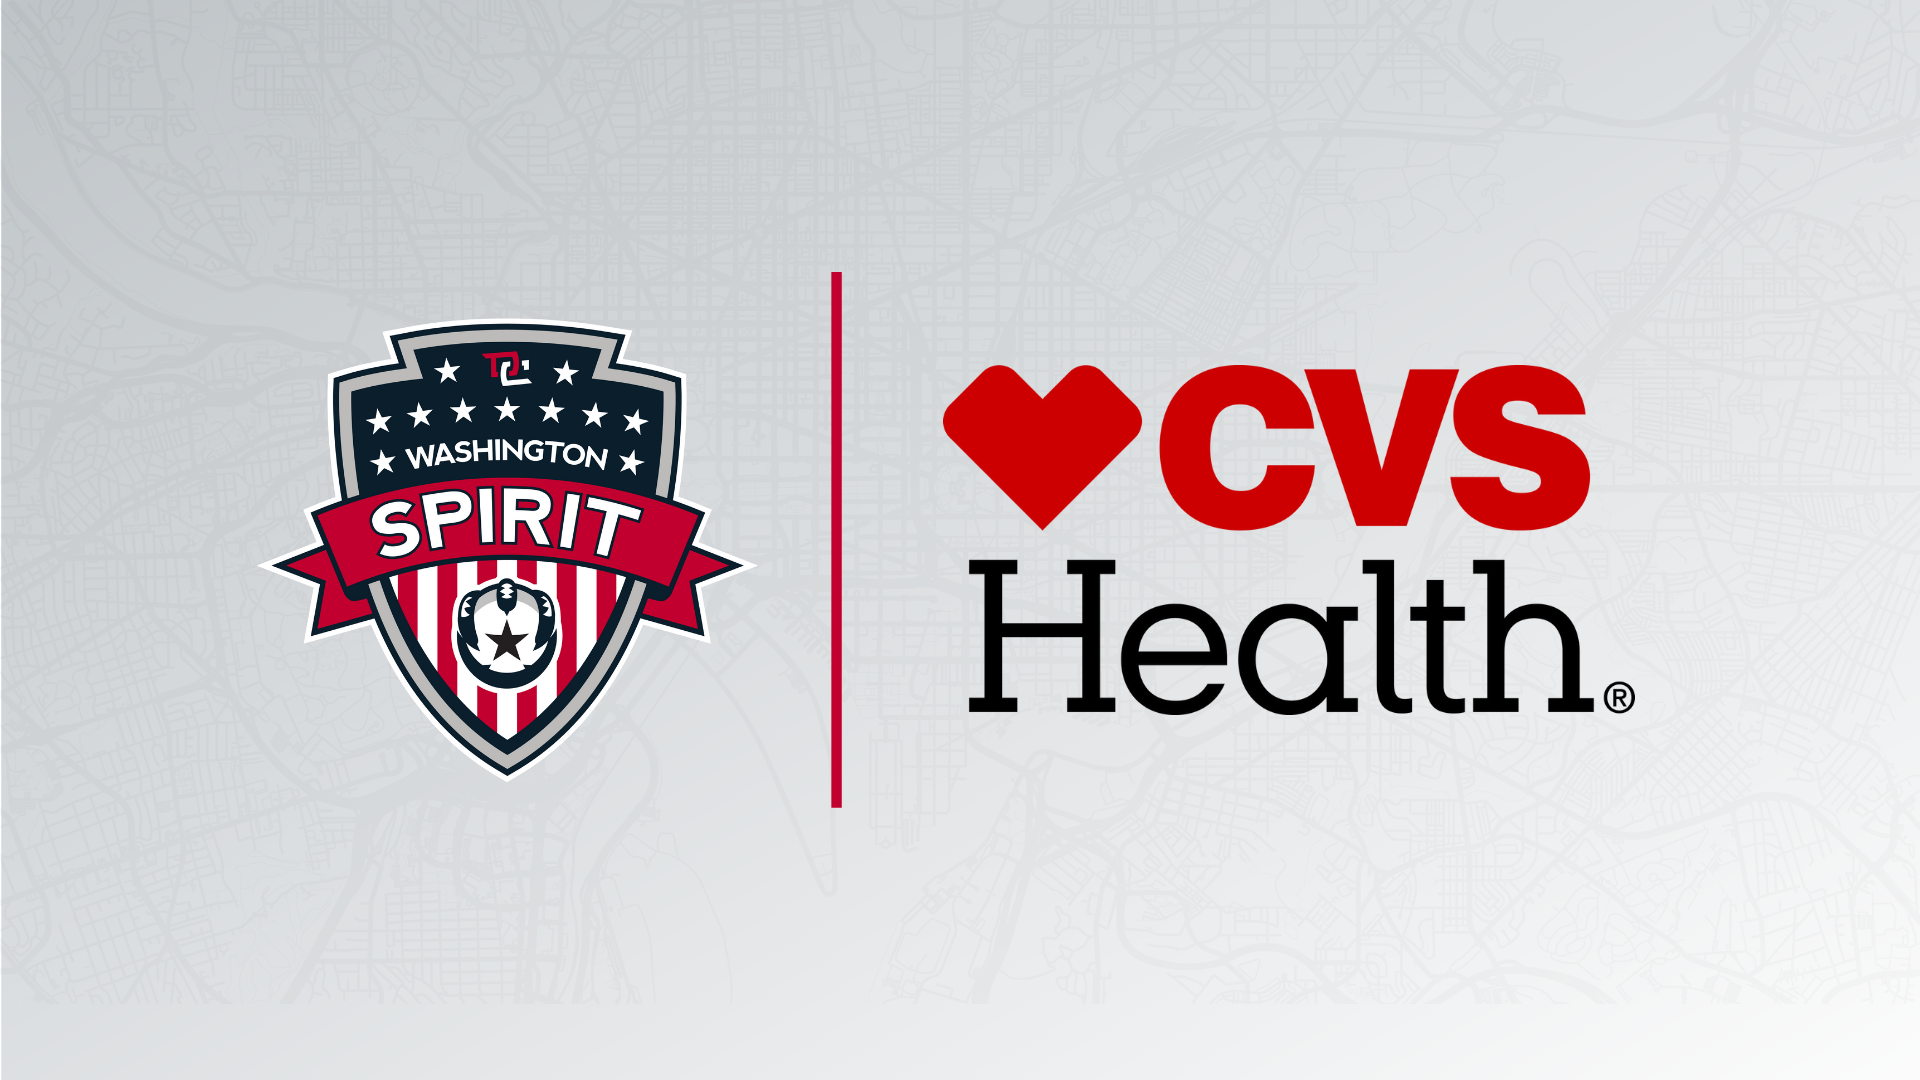 Washington Spirit and CVS Health Announce Sponsorship Renewal for 2021 Featured Image